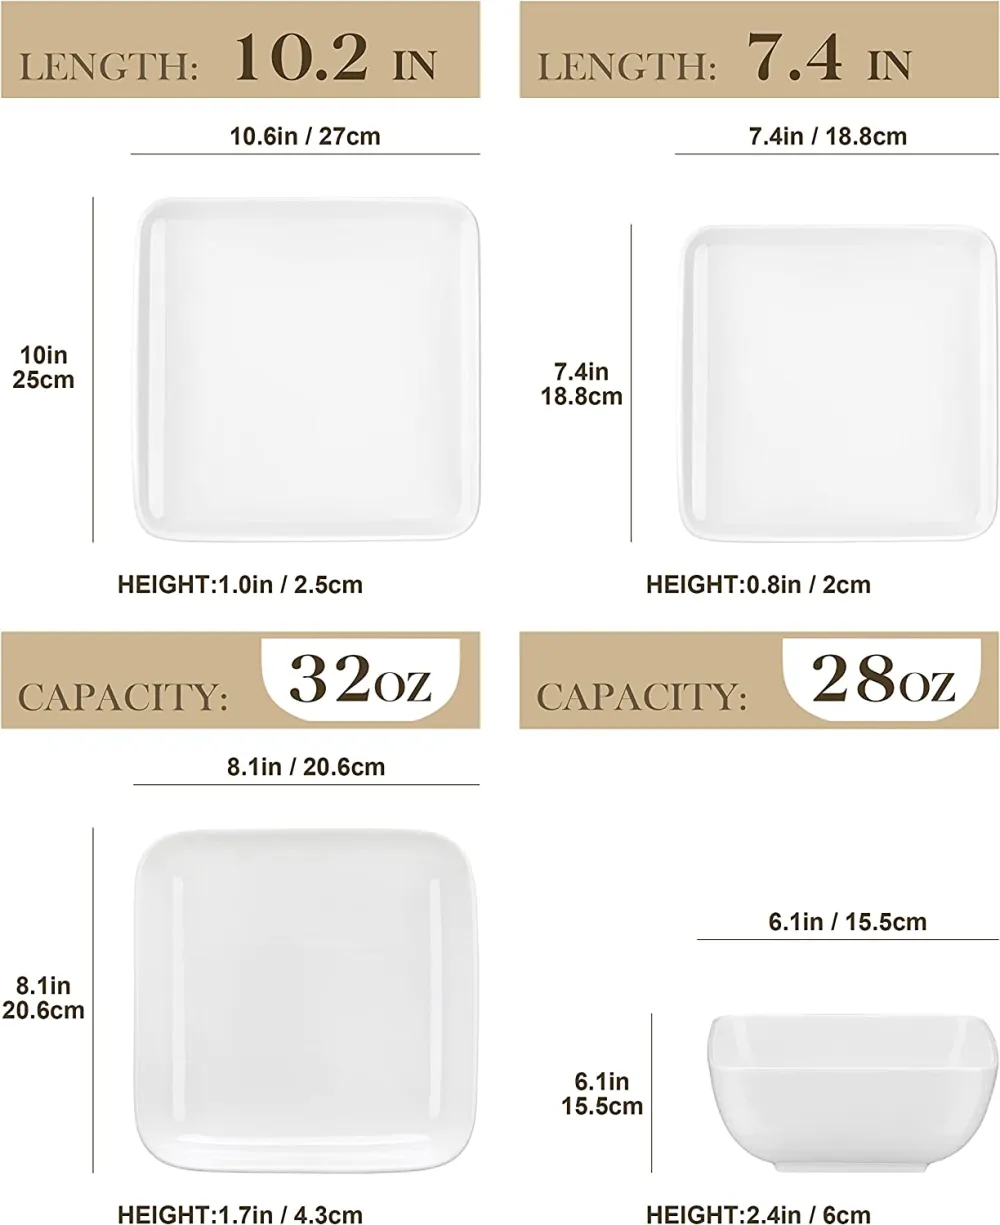 MALACASA Dishes Set for 12, Marble Grey Square Dinnerware Sets, 48 Piece Porcelain Plates and Bowls Sets with Dinner Plates, Dessert Plates, Soup Plates and Cereal Bowls, Series IVY